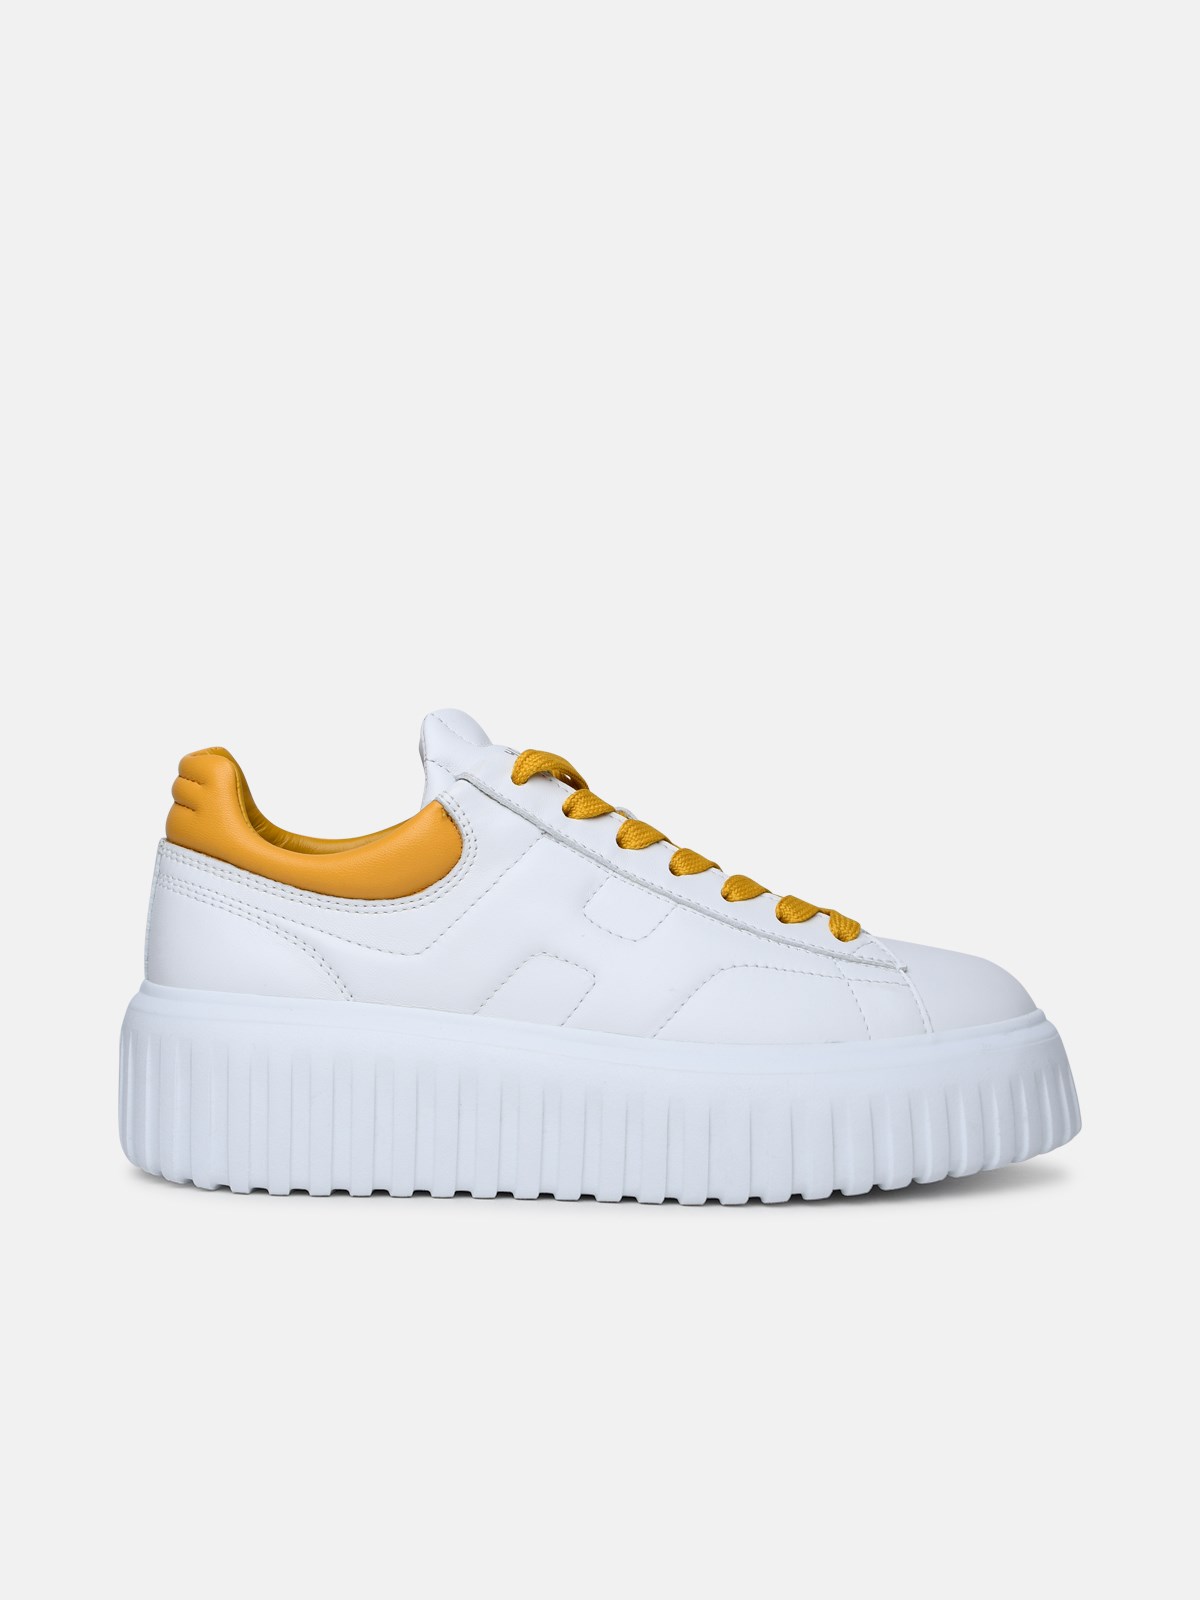 Hogan White Leather Sneakers